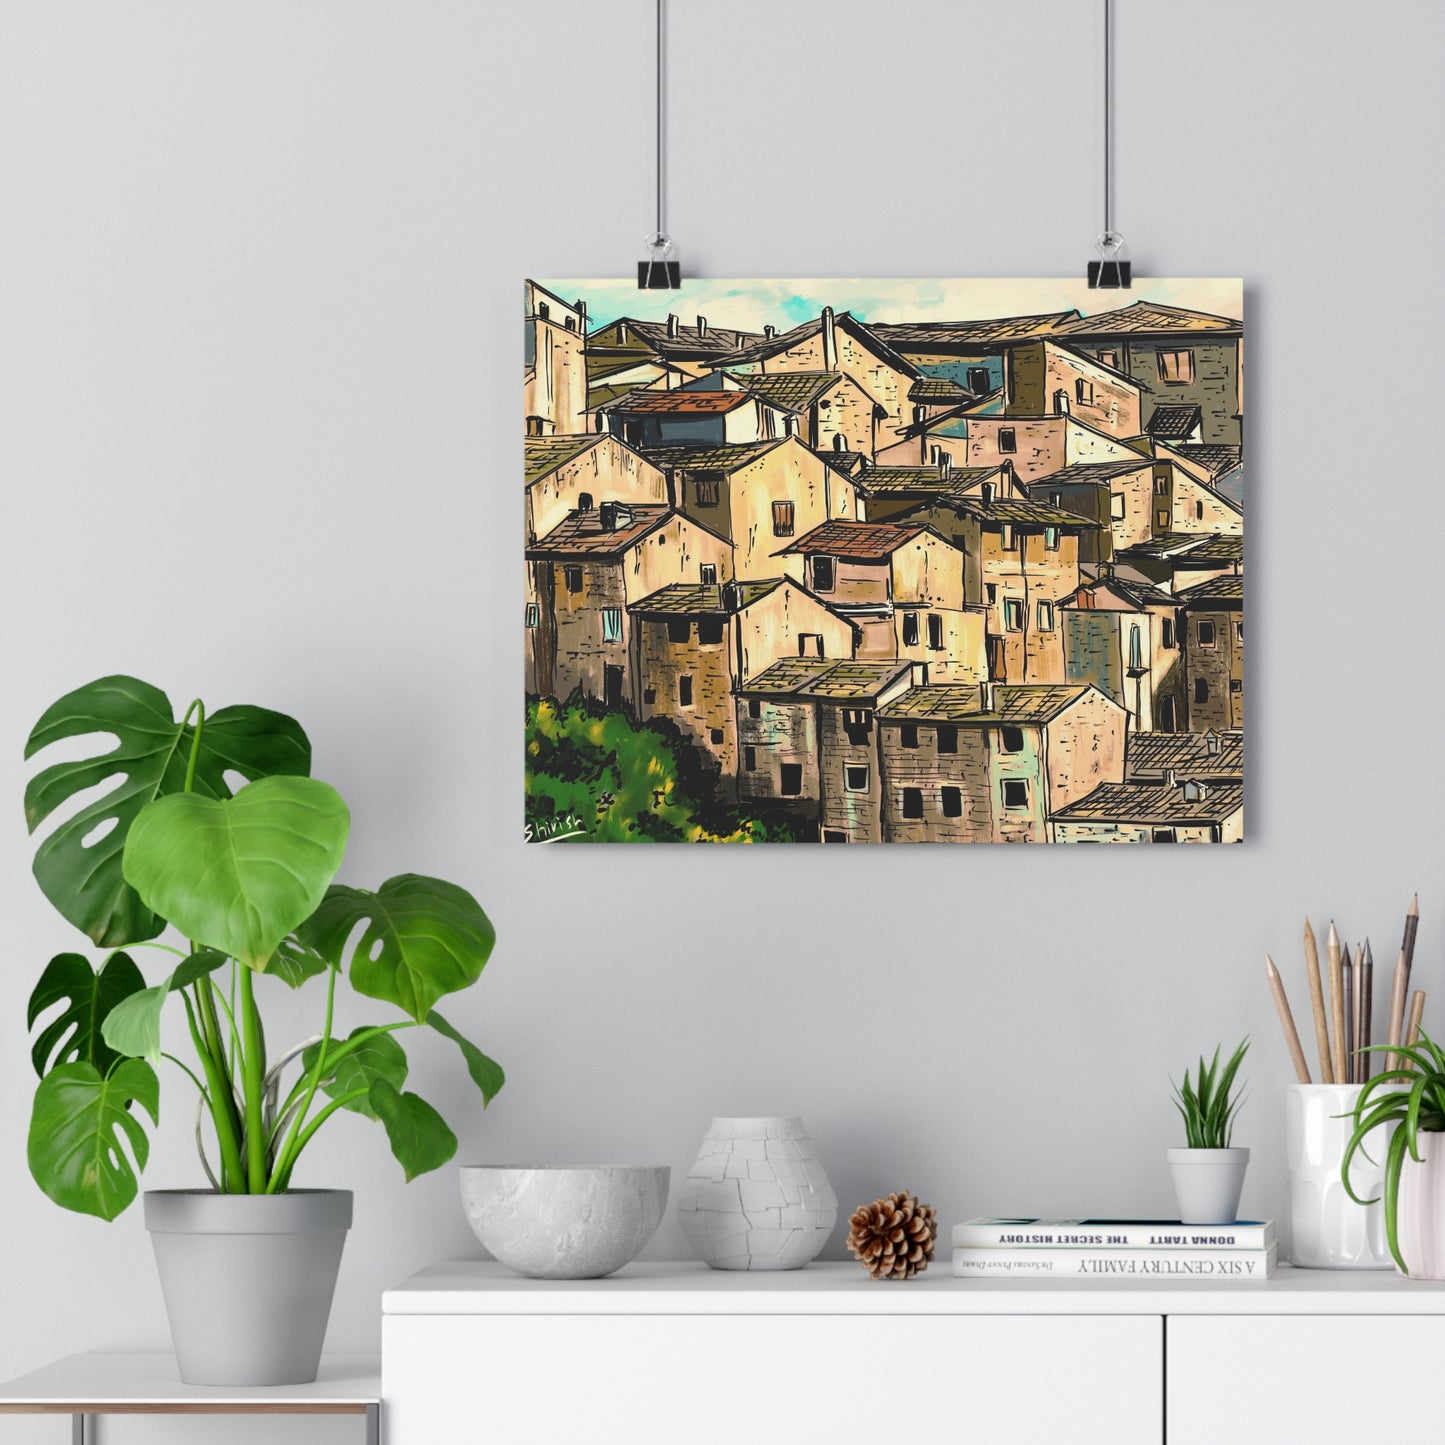 A Majestic View of Scanno, Italy - Premium Poster